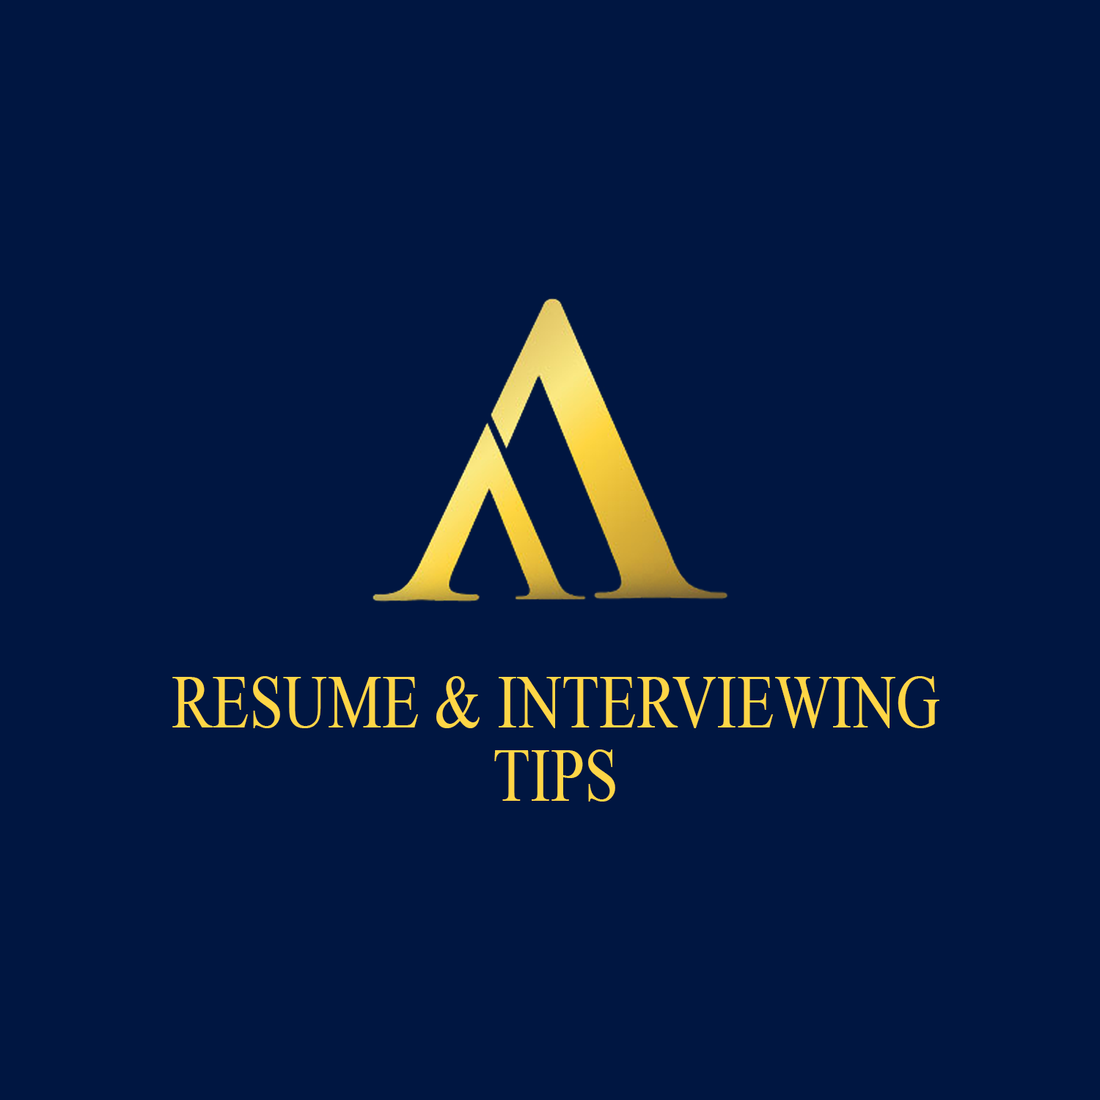 Resumes and Interviewing Tips